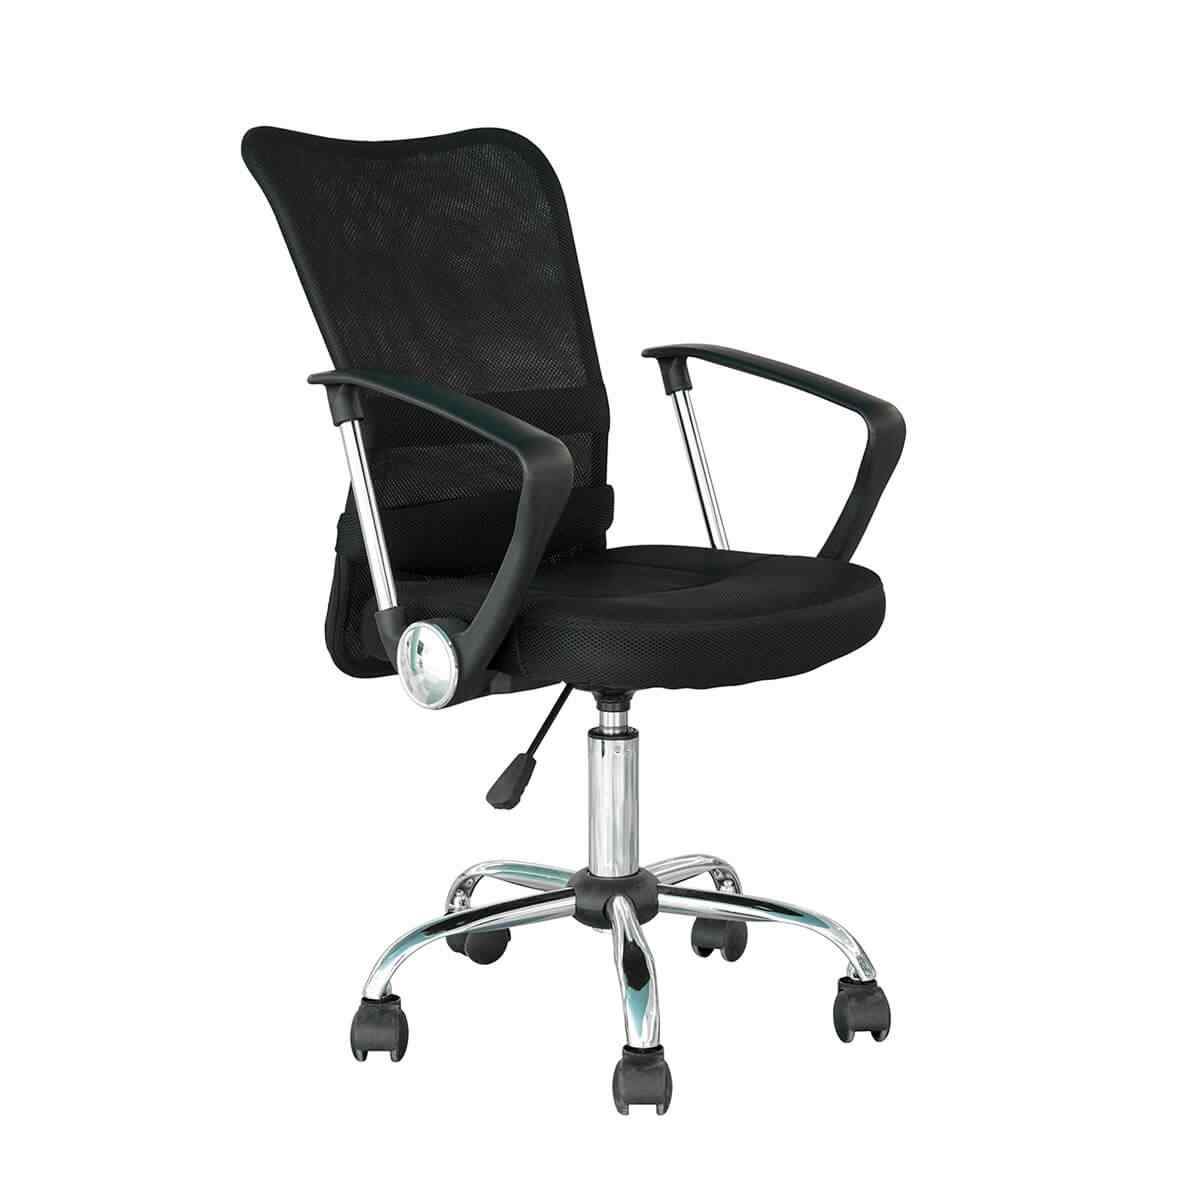 White leather office chair - Greater Houston Roofing